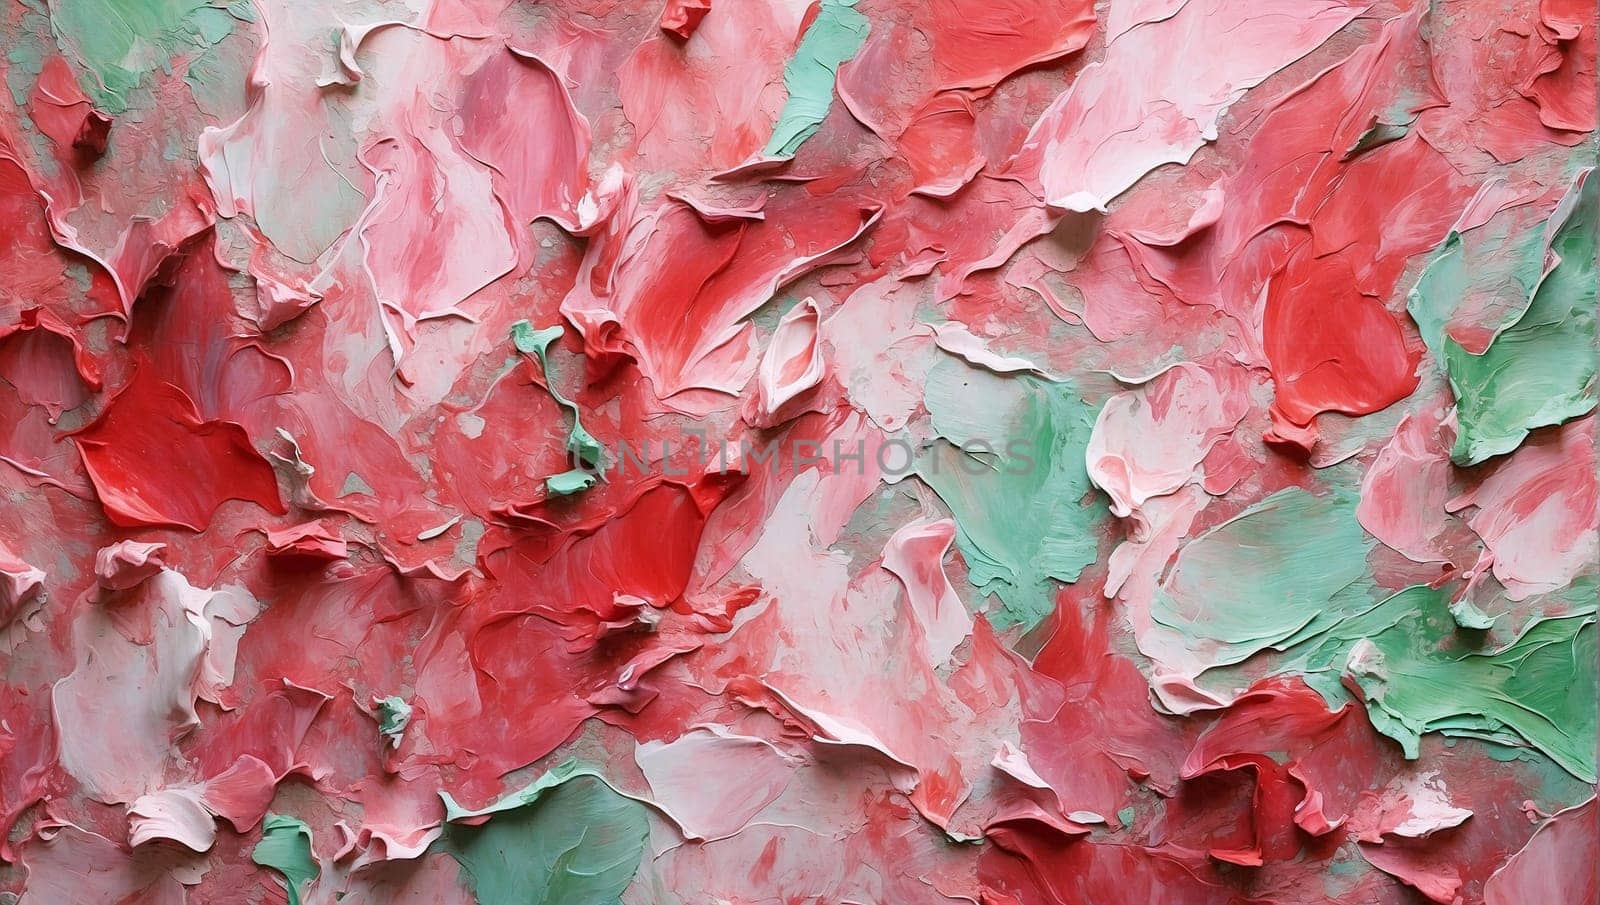 pink texture, red-green abstract background by Севостьянов